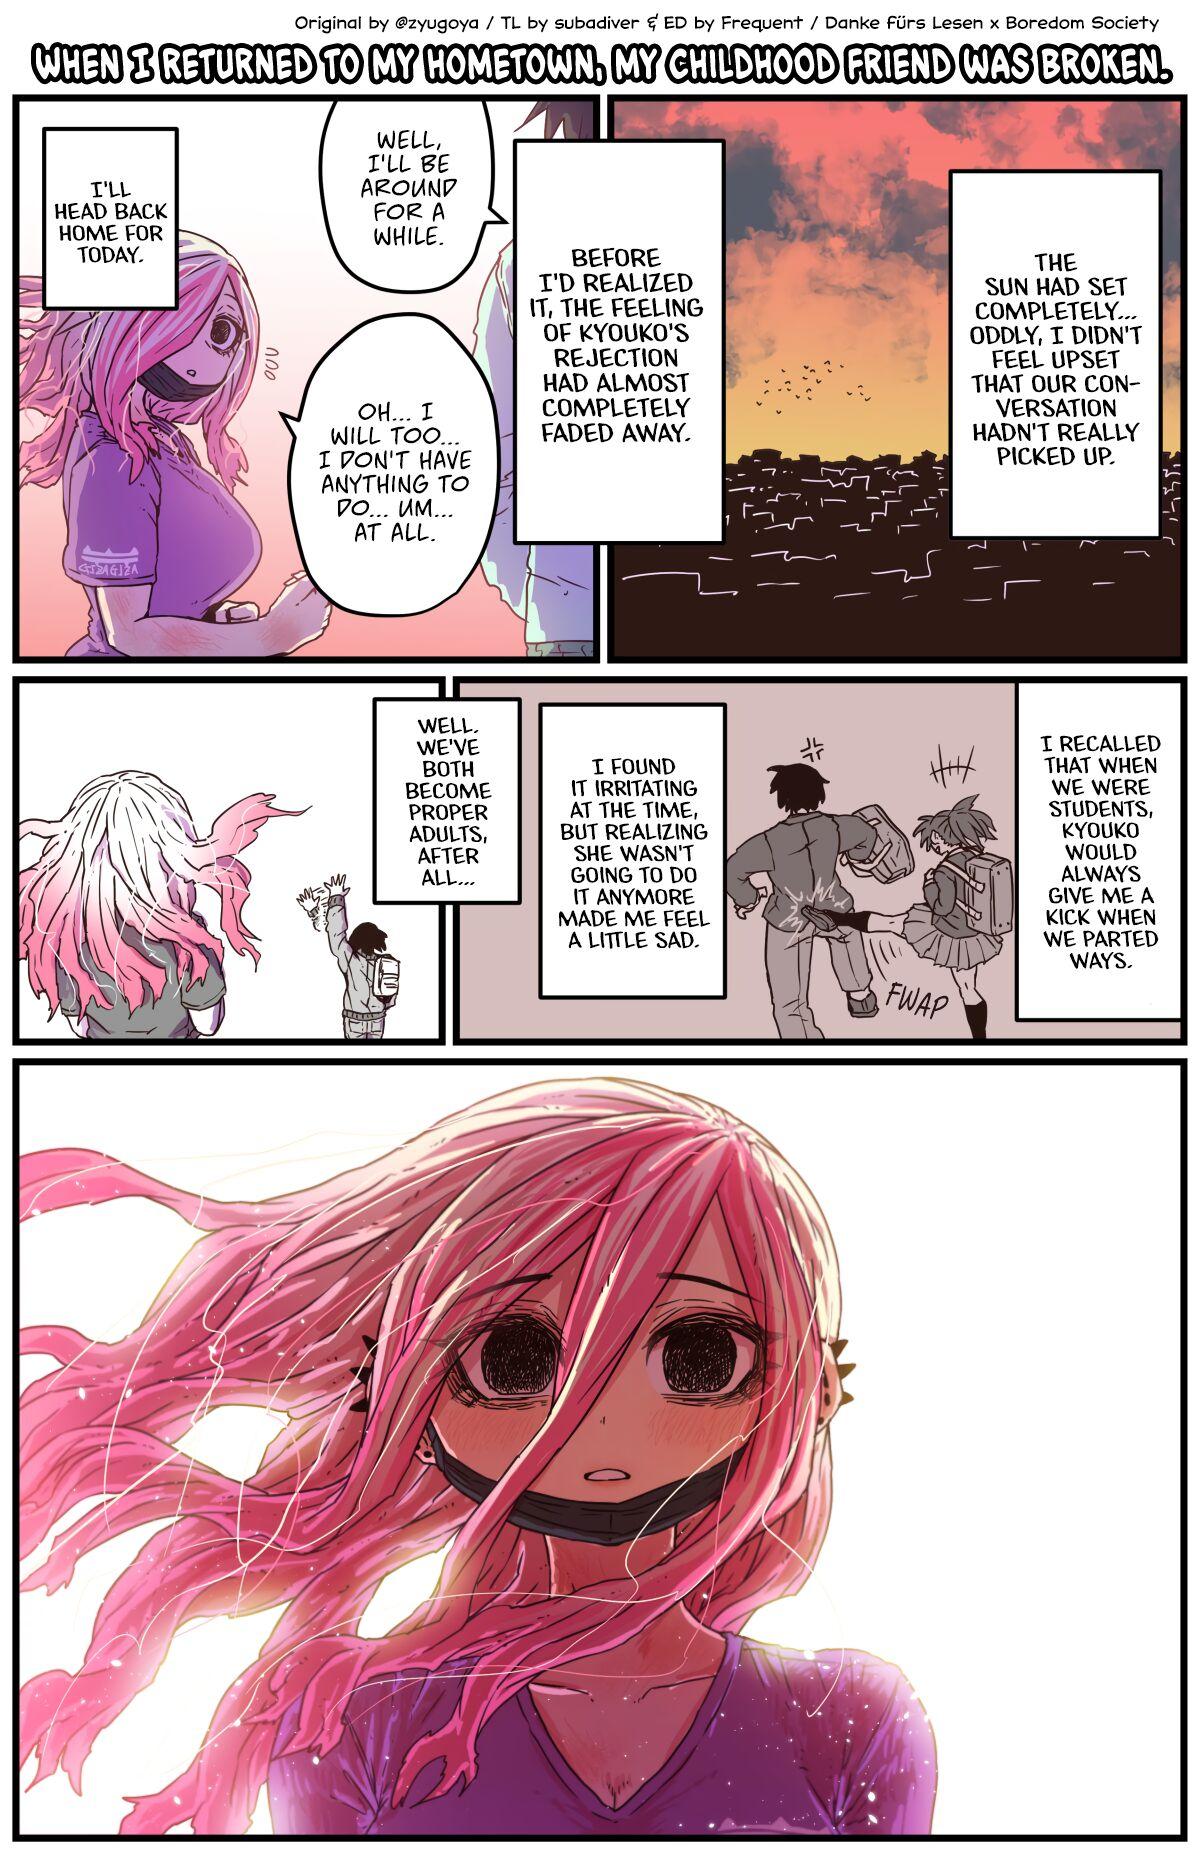 Buttfucking When I Returned to My Hometown, My Childhood Friend was Broken - Original First - Page 5